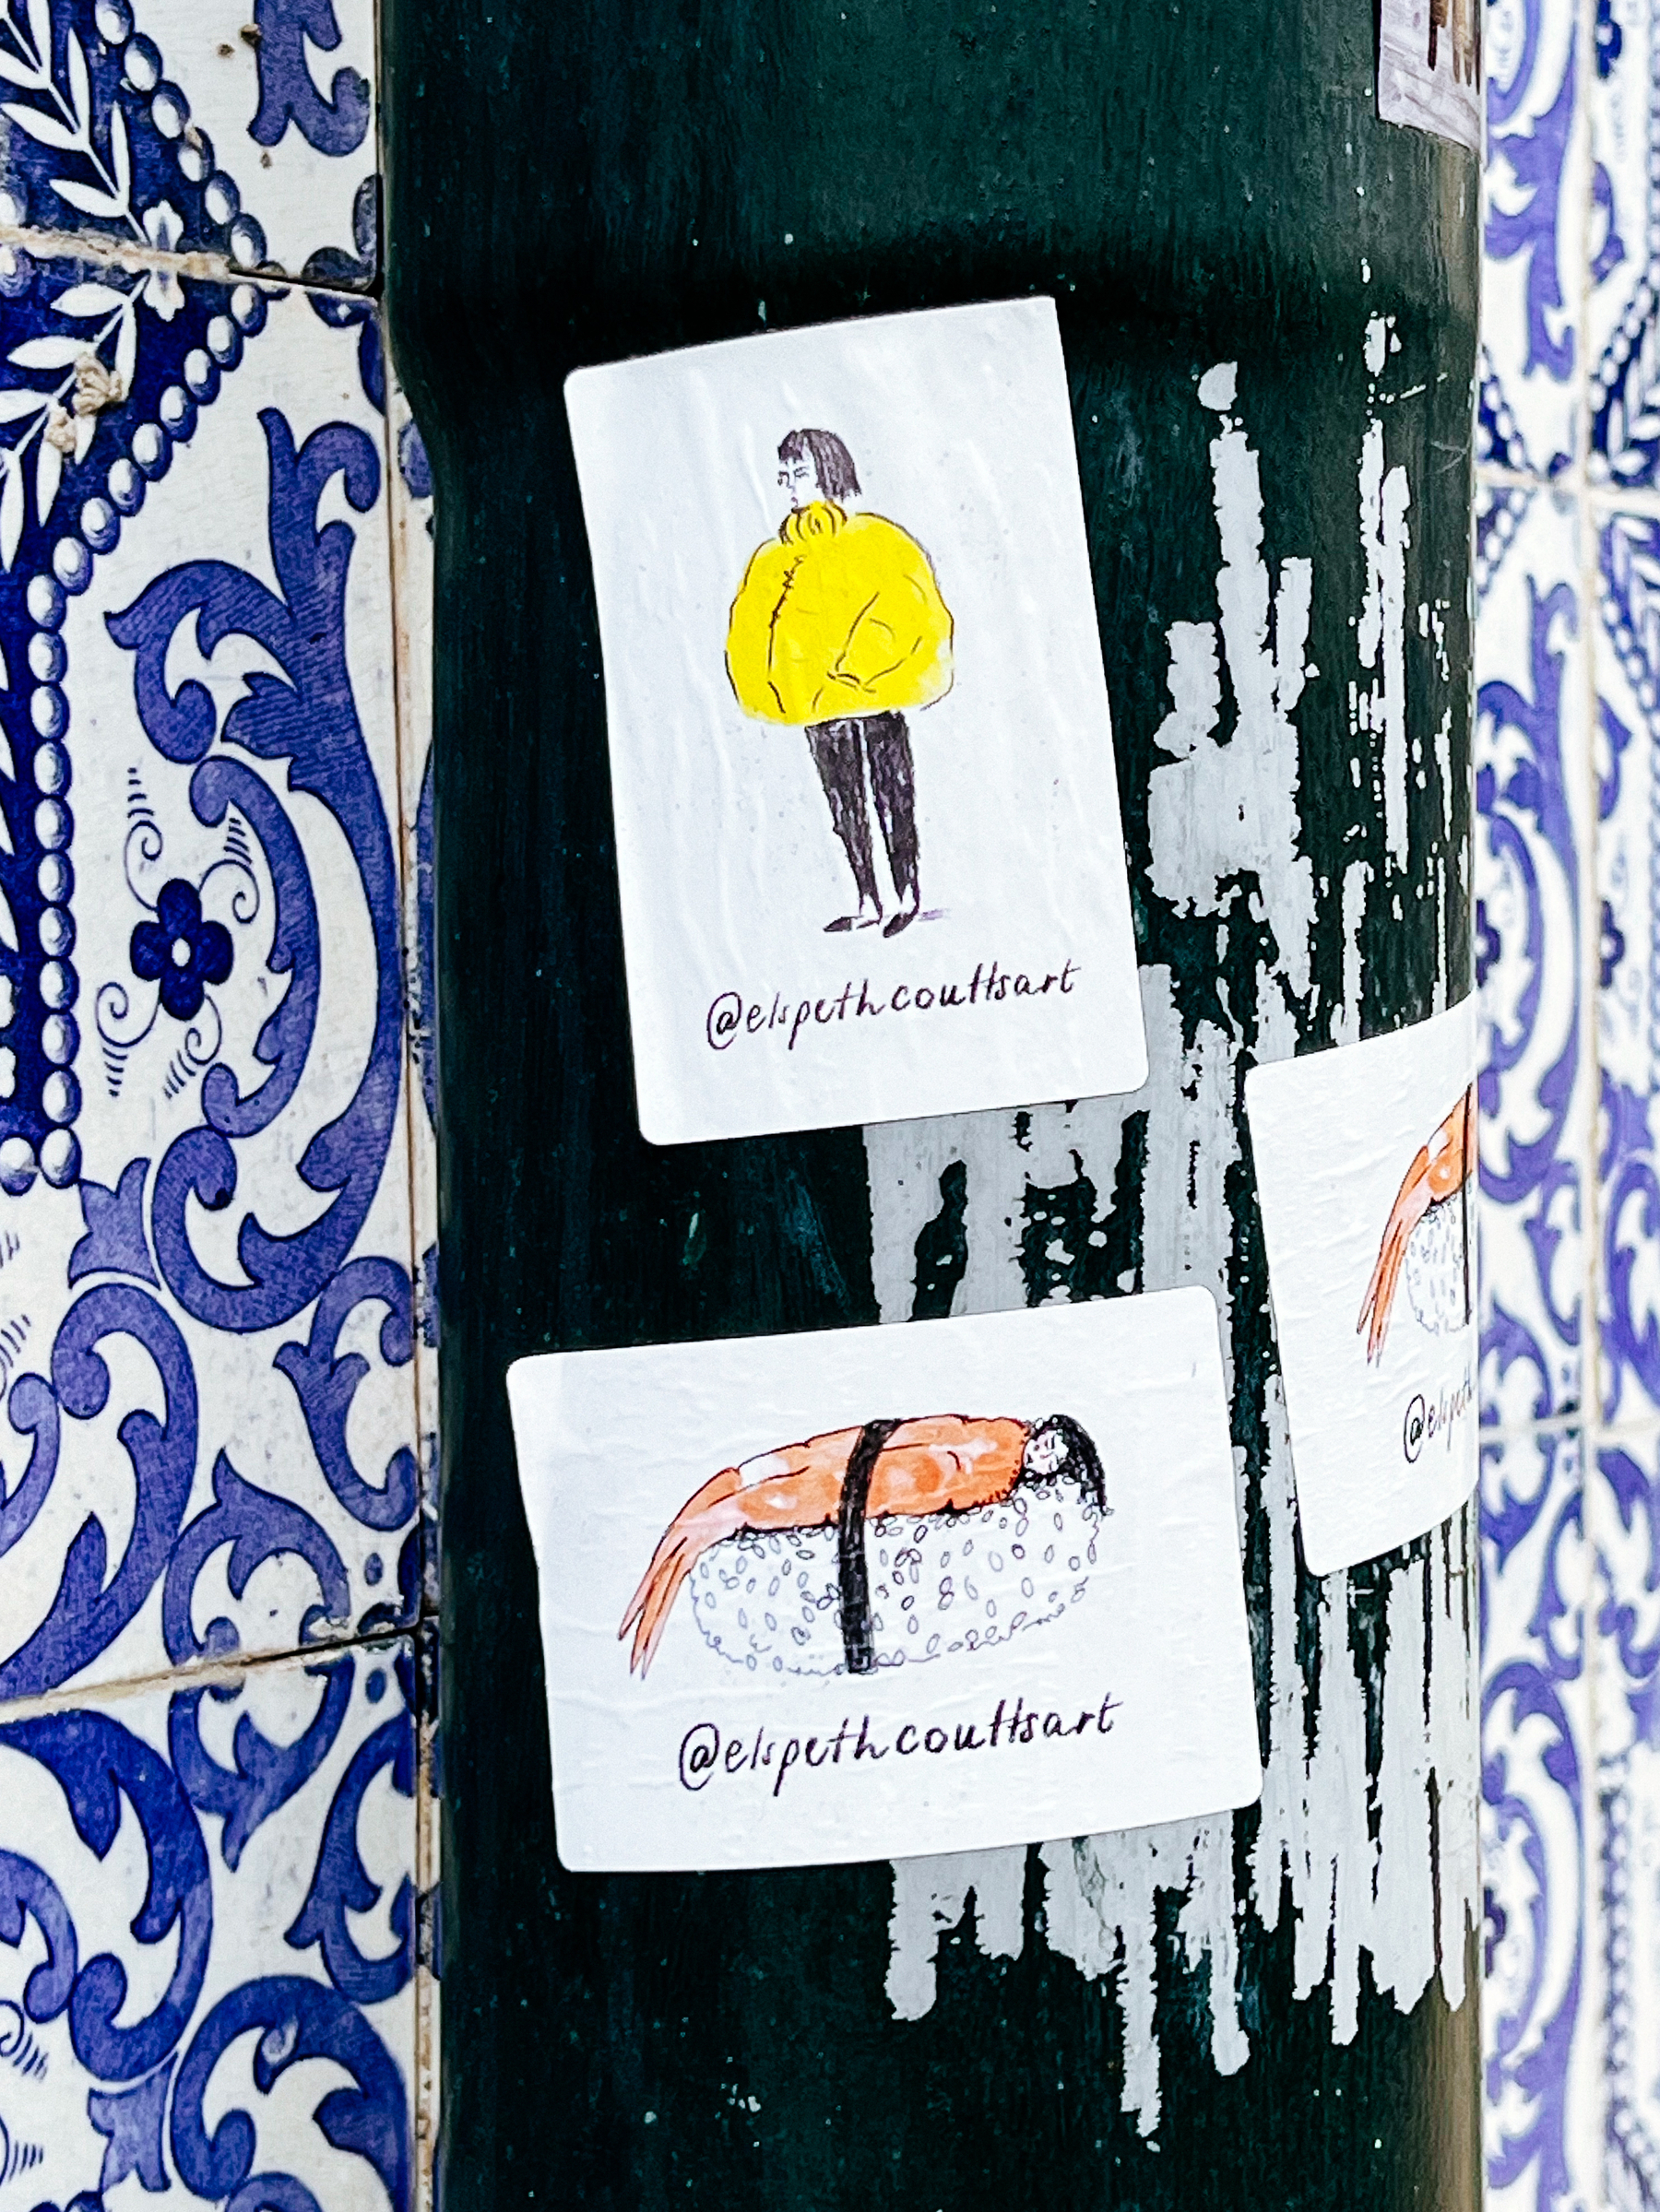 Stickers depicting a person in a yellow jacket and a person/shrimp sushi are affixed to a lamp post, with the artist’s handle displayed.